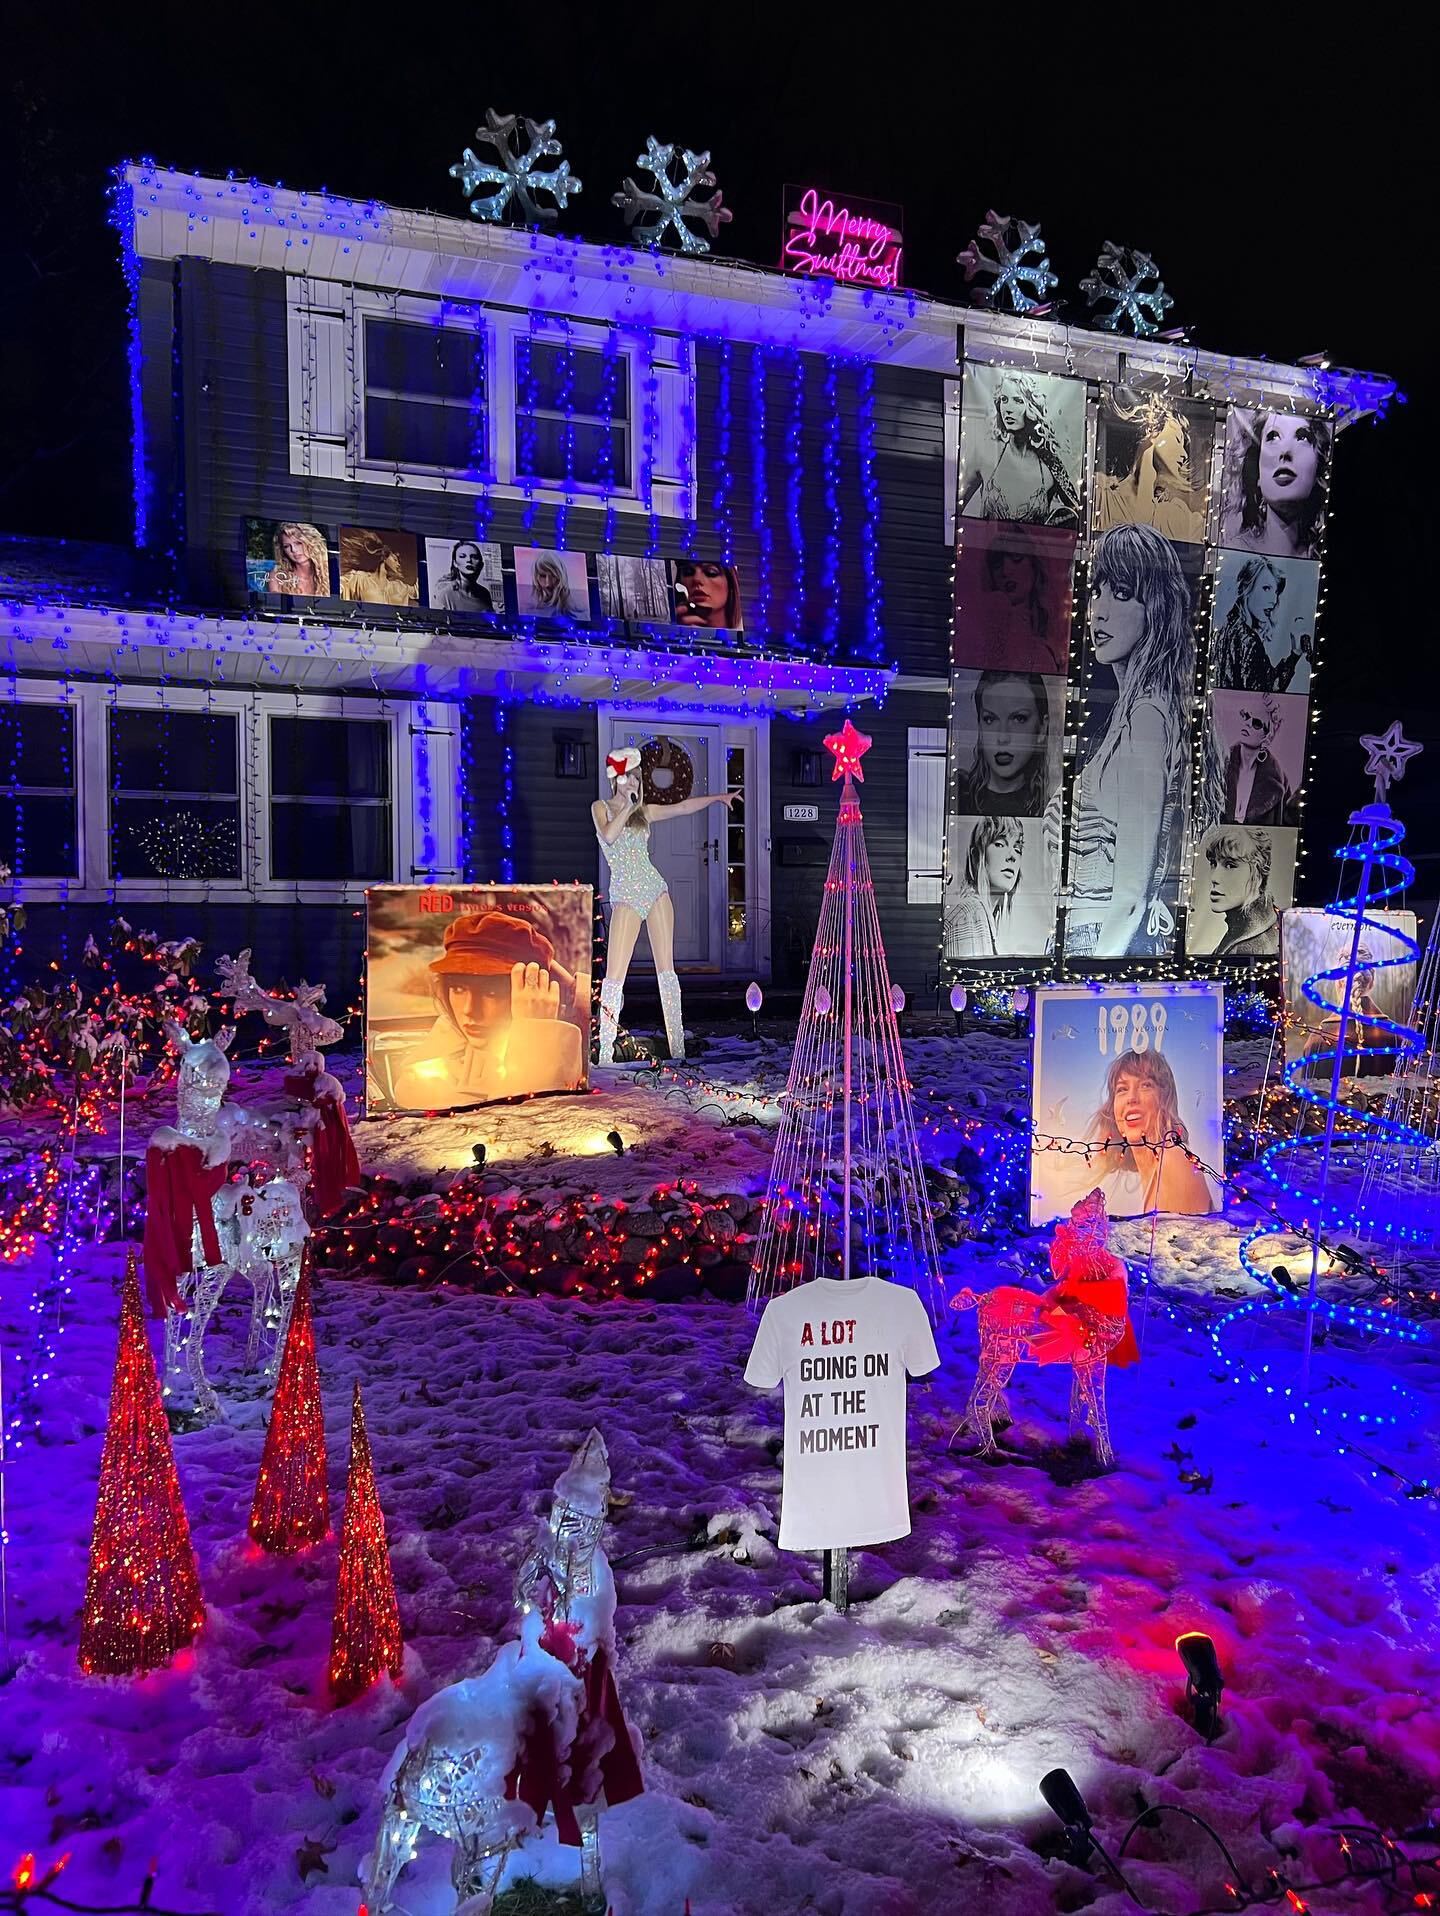 Taylor Swift Christmas decorations? Illinois family home must-see